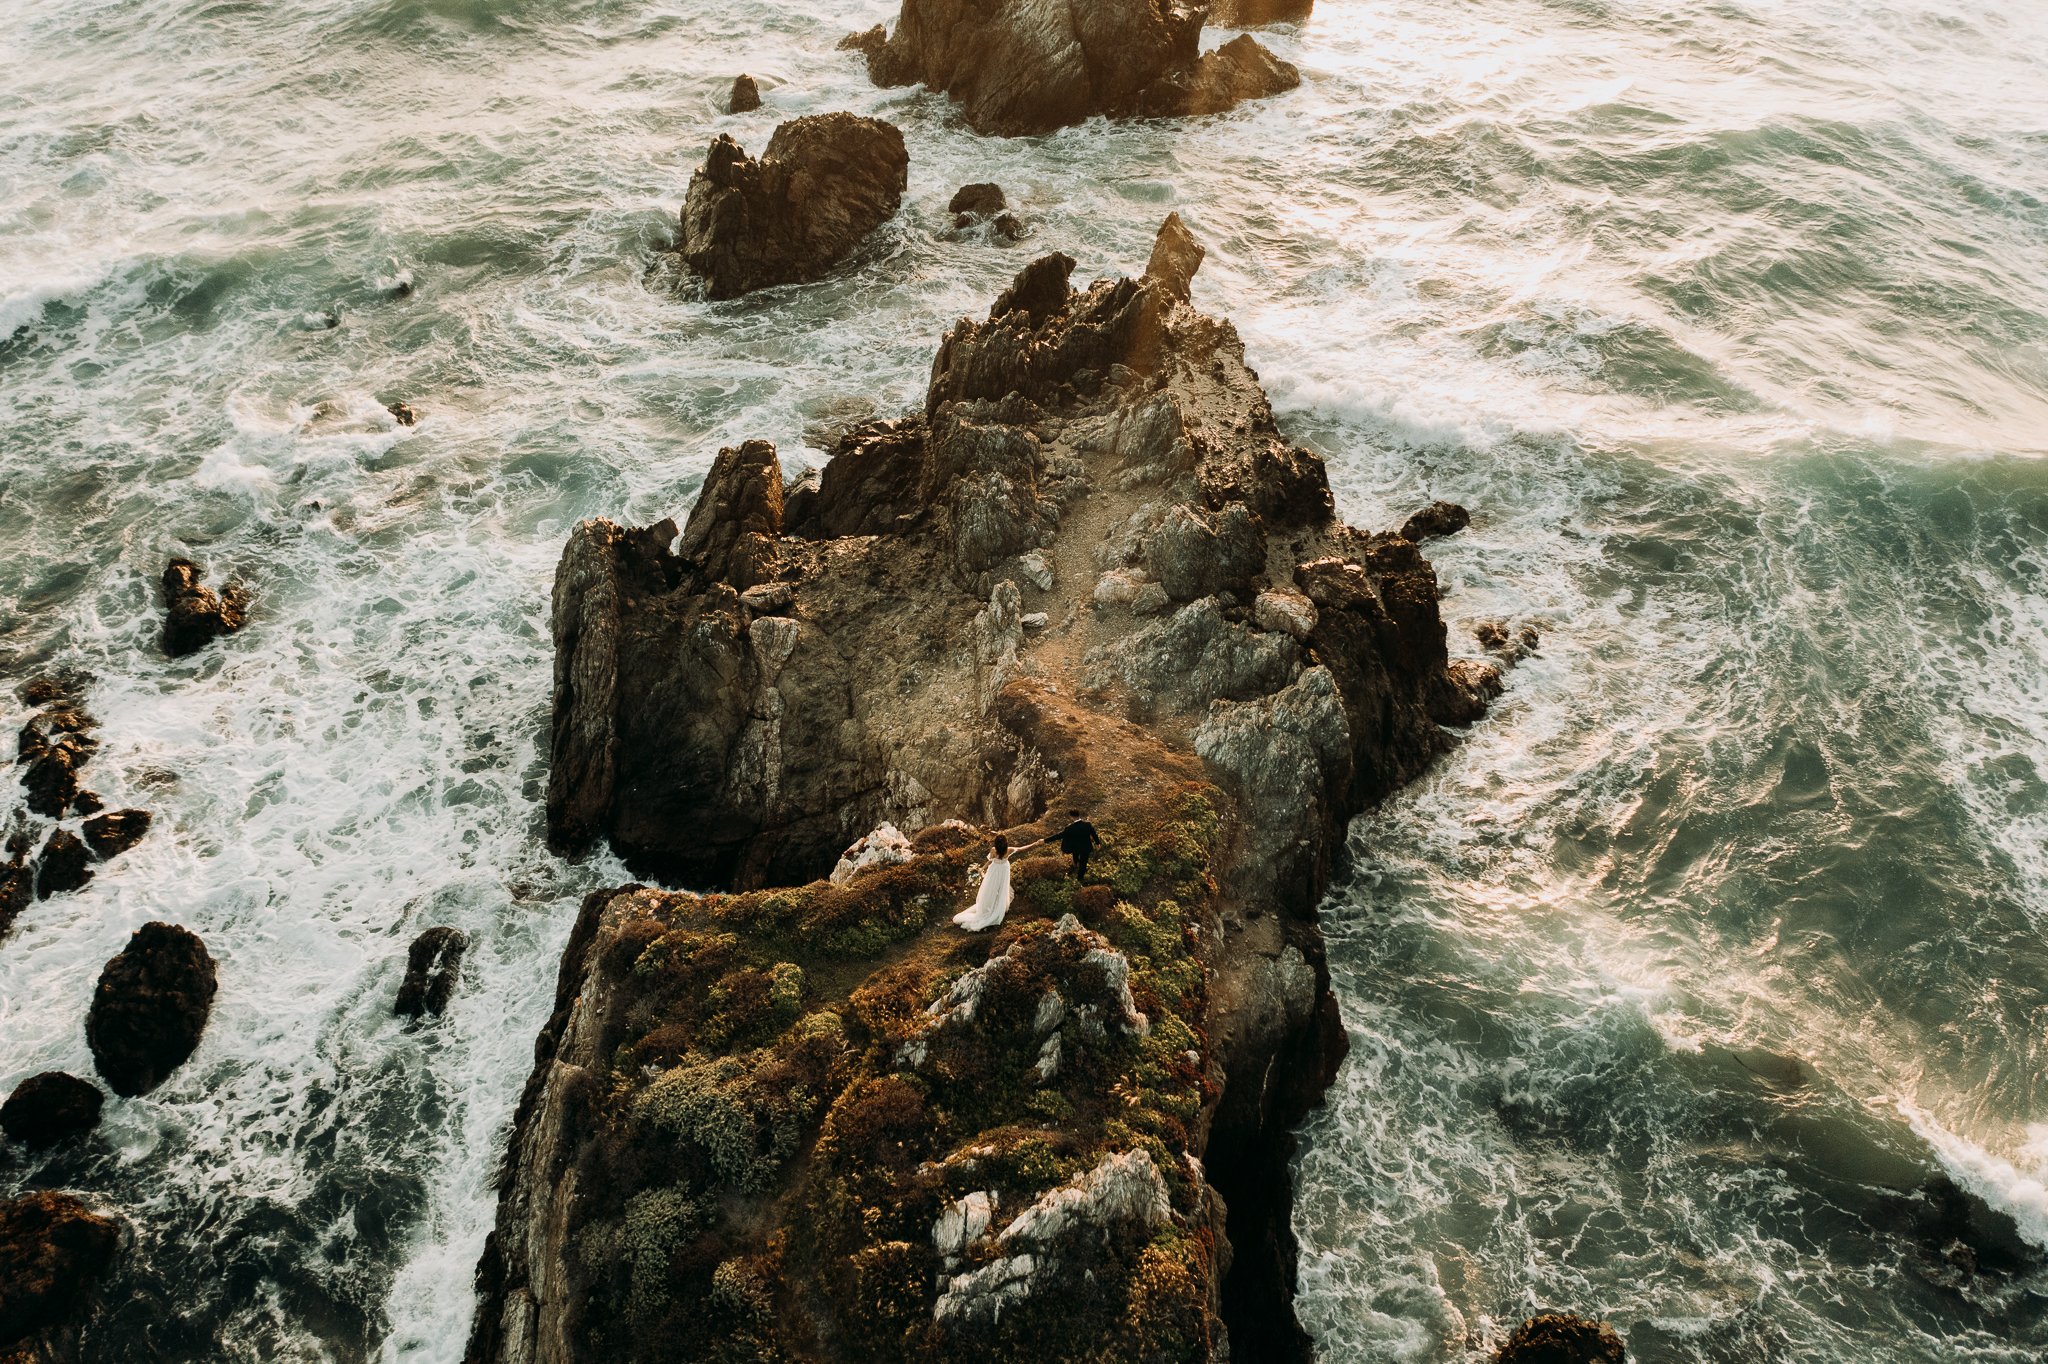 Drone photo of bride and groom walking of cliffs with Pacific ocean surrounding them both